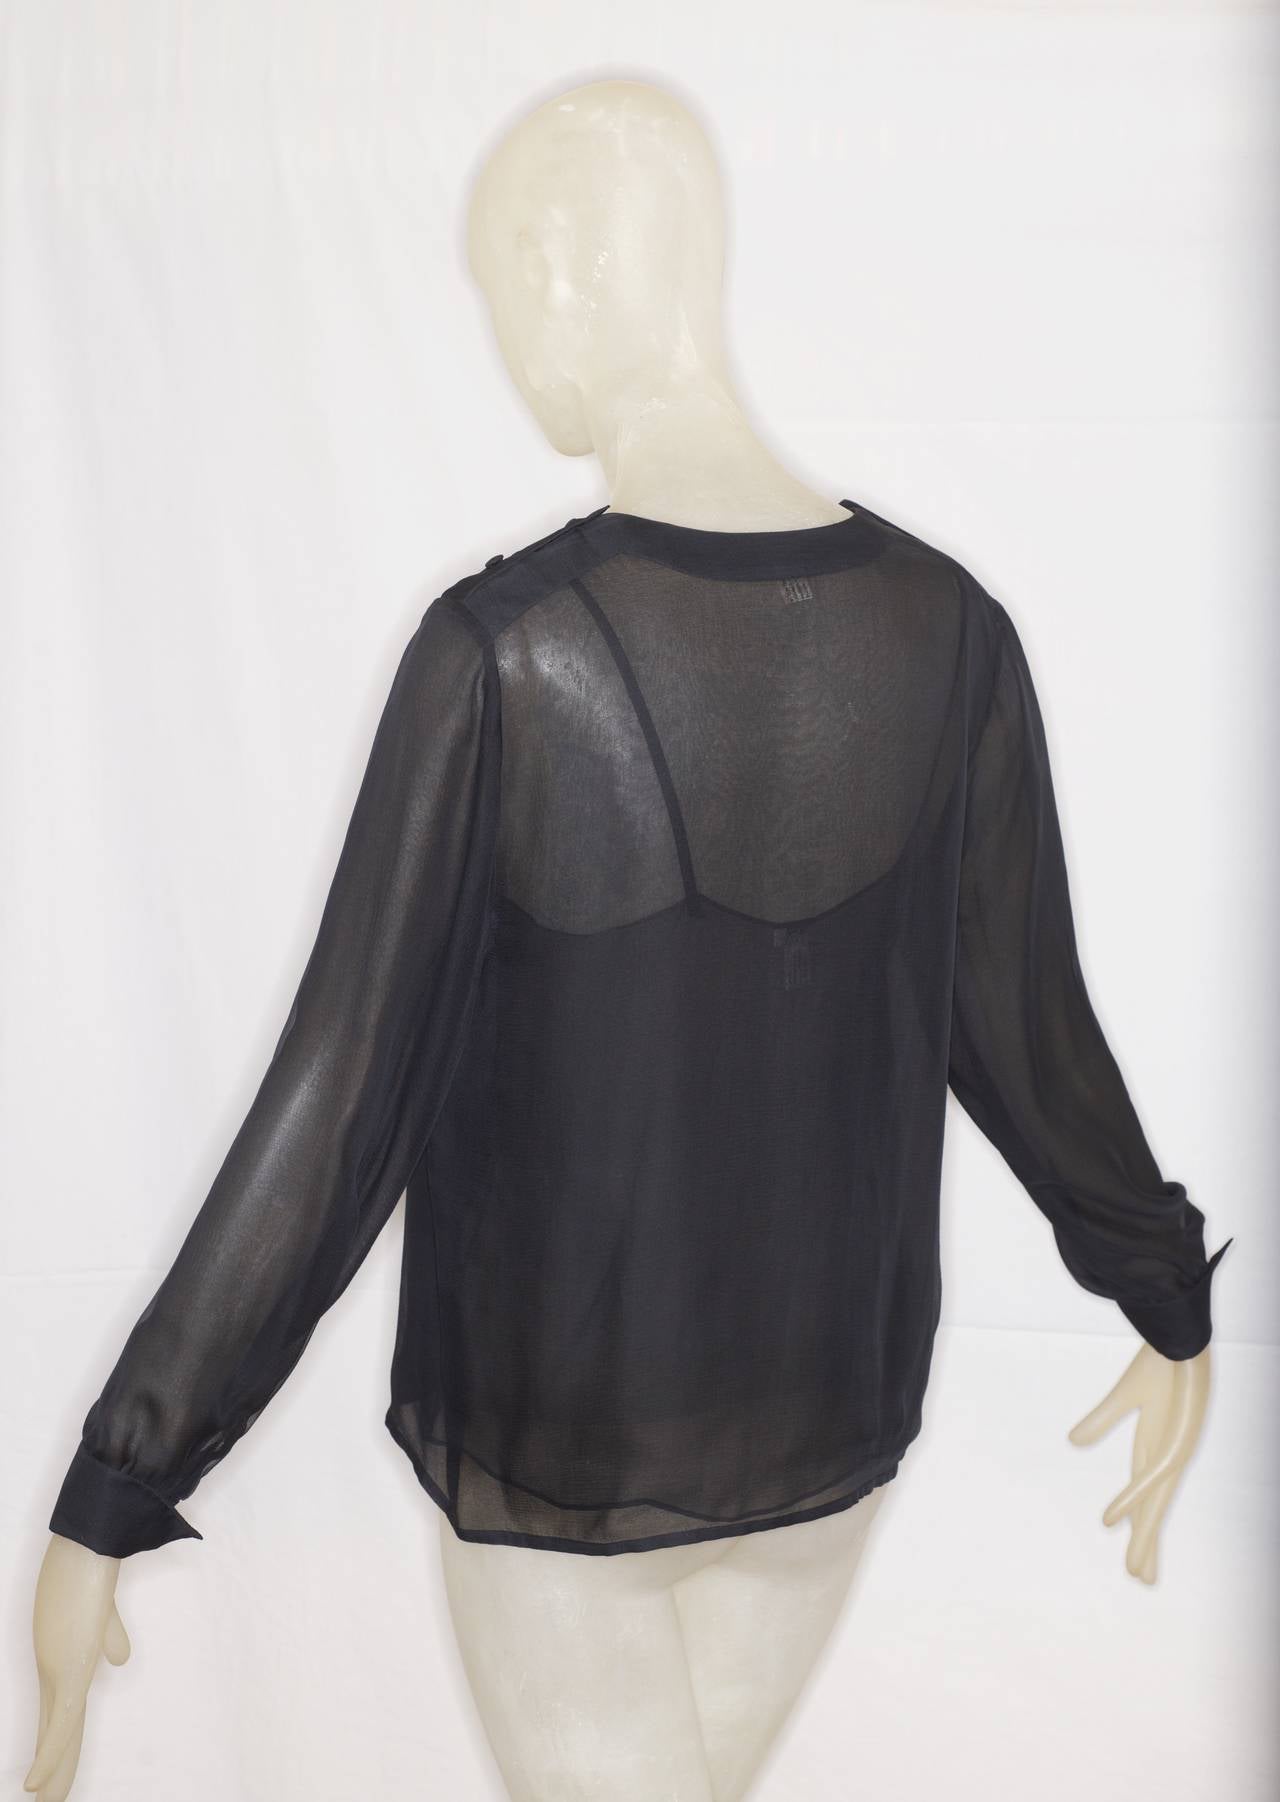 Chanel Silk Chiffon Blouse and Camisole For Sale 2